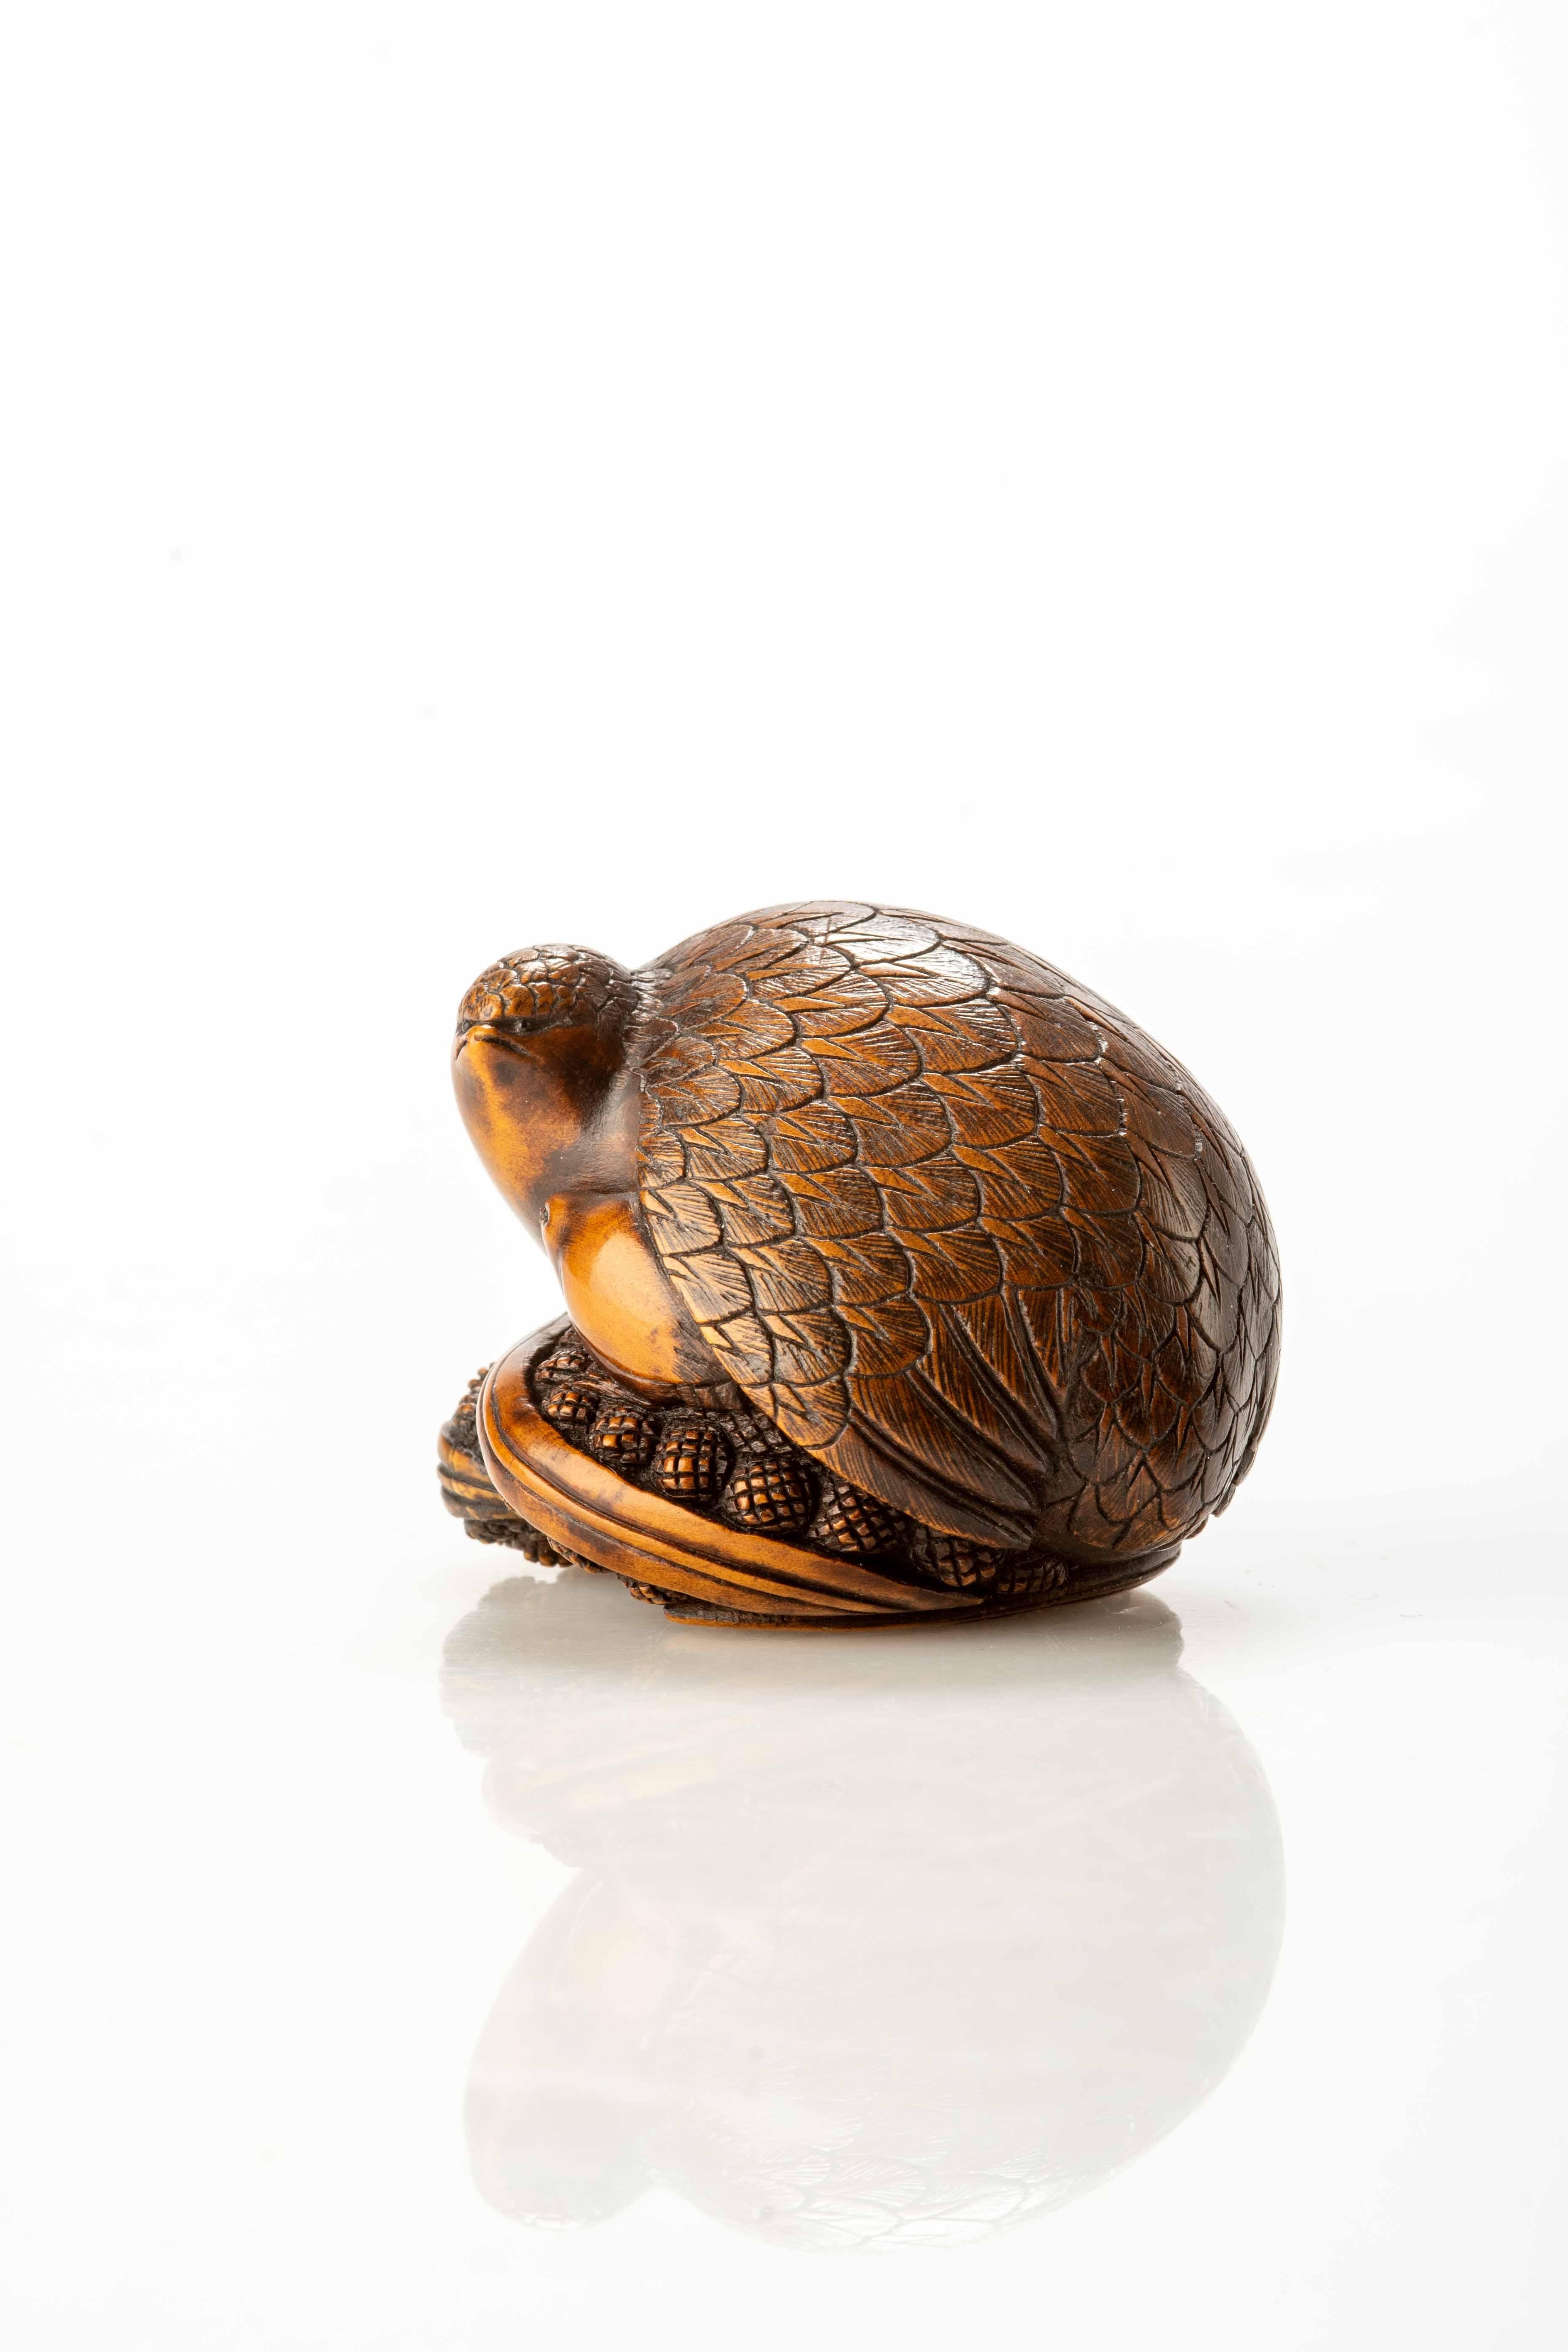 Japanese A Boxwood Netsuke Depicting A Pair Of Quails Crouching On Millet